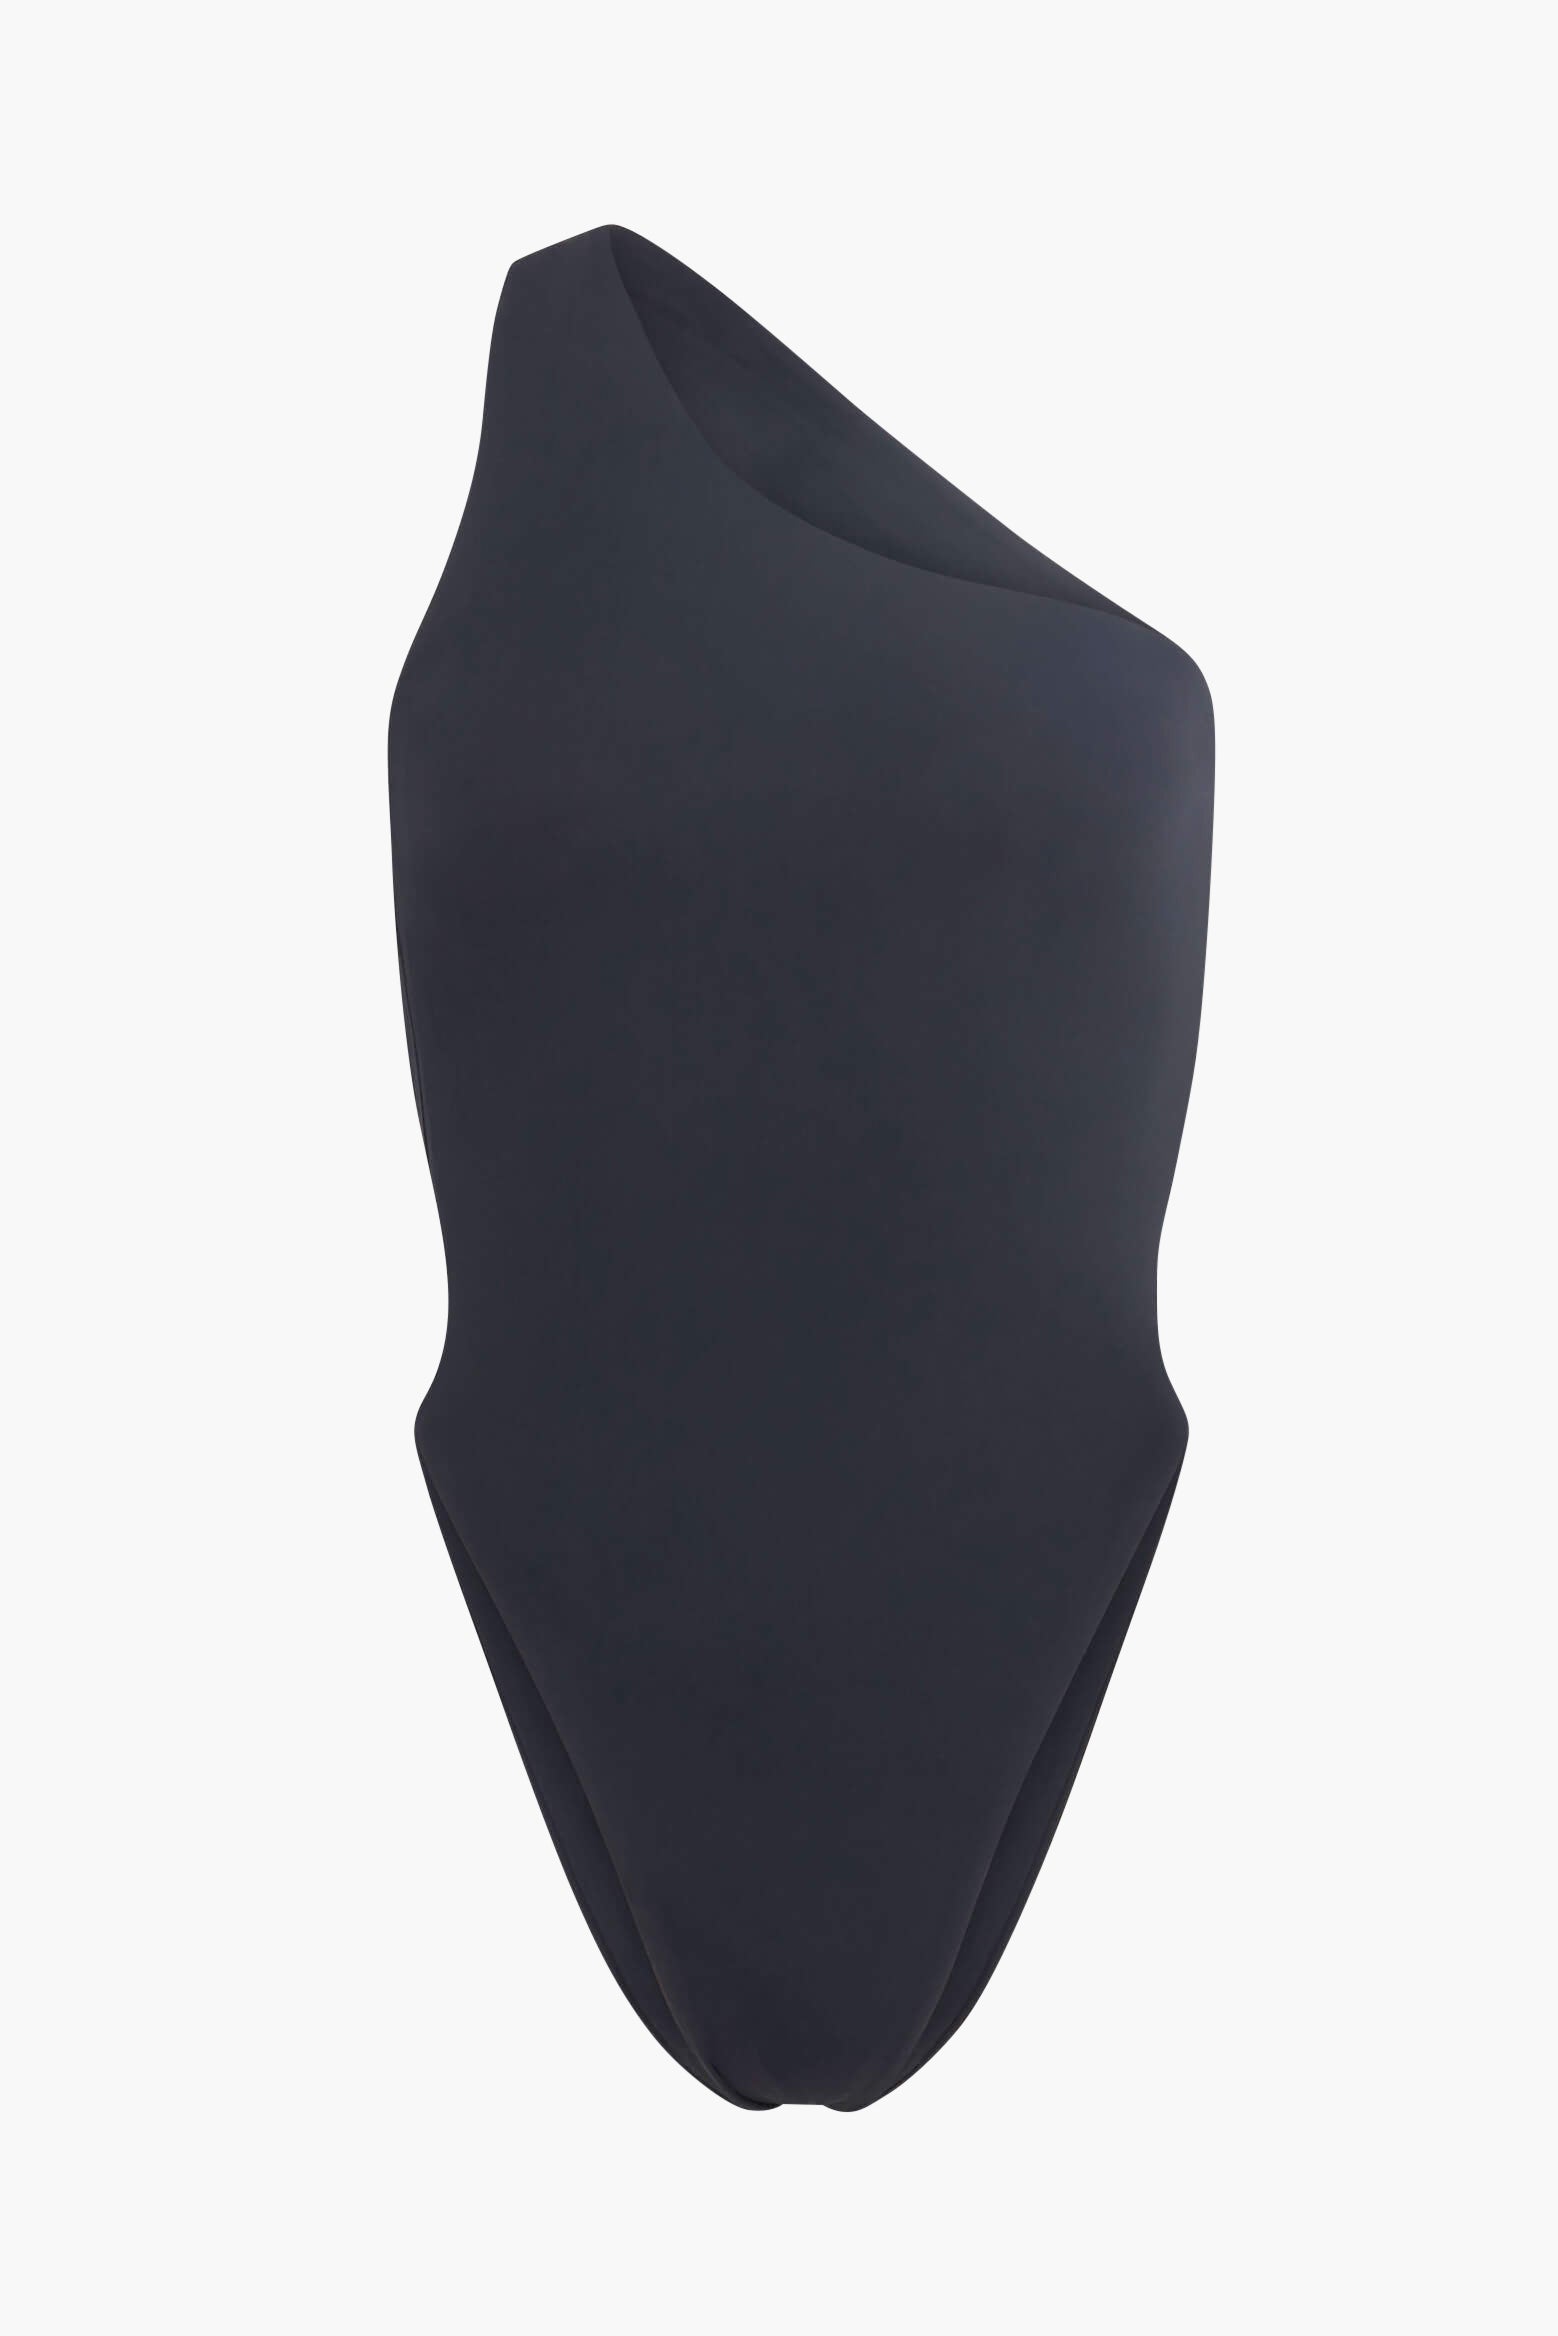 Louisa Ballou Plunge Swimsuit in Black available at TNT The New Trend Australia.